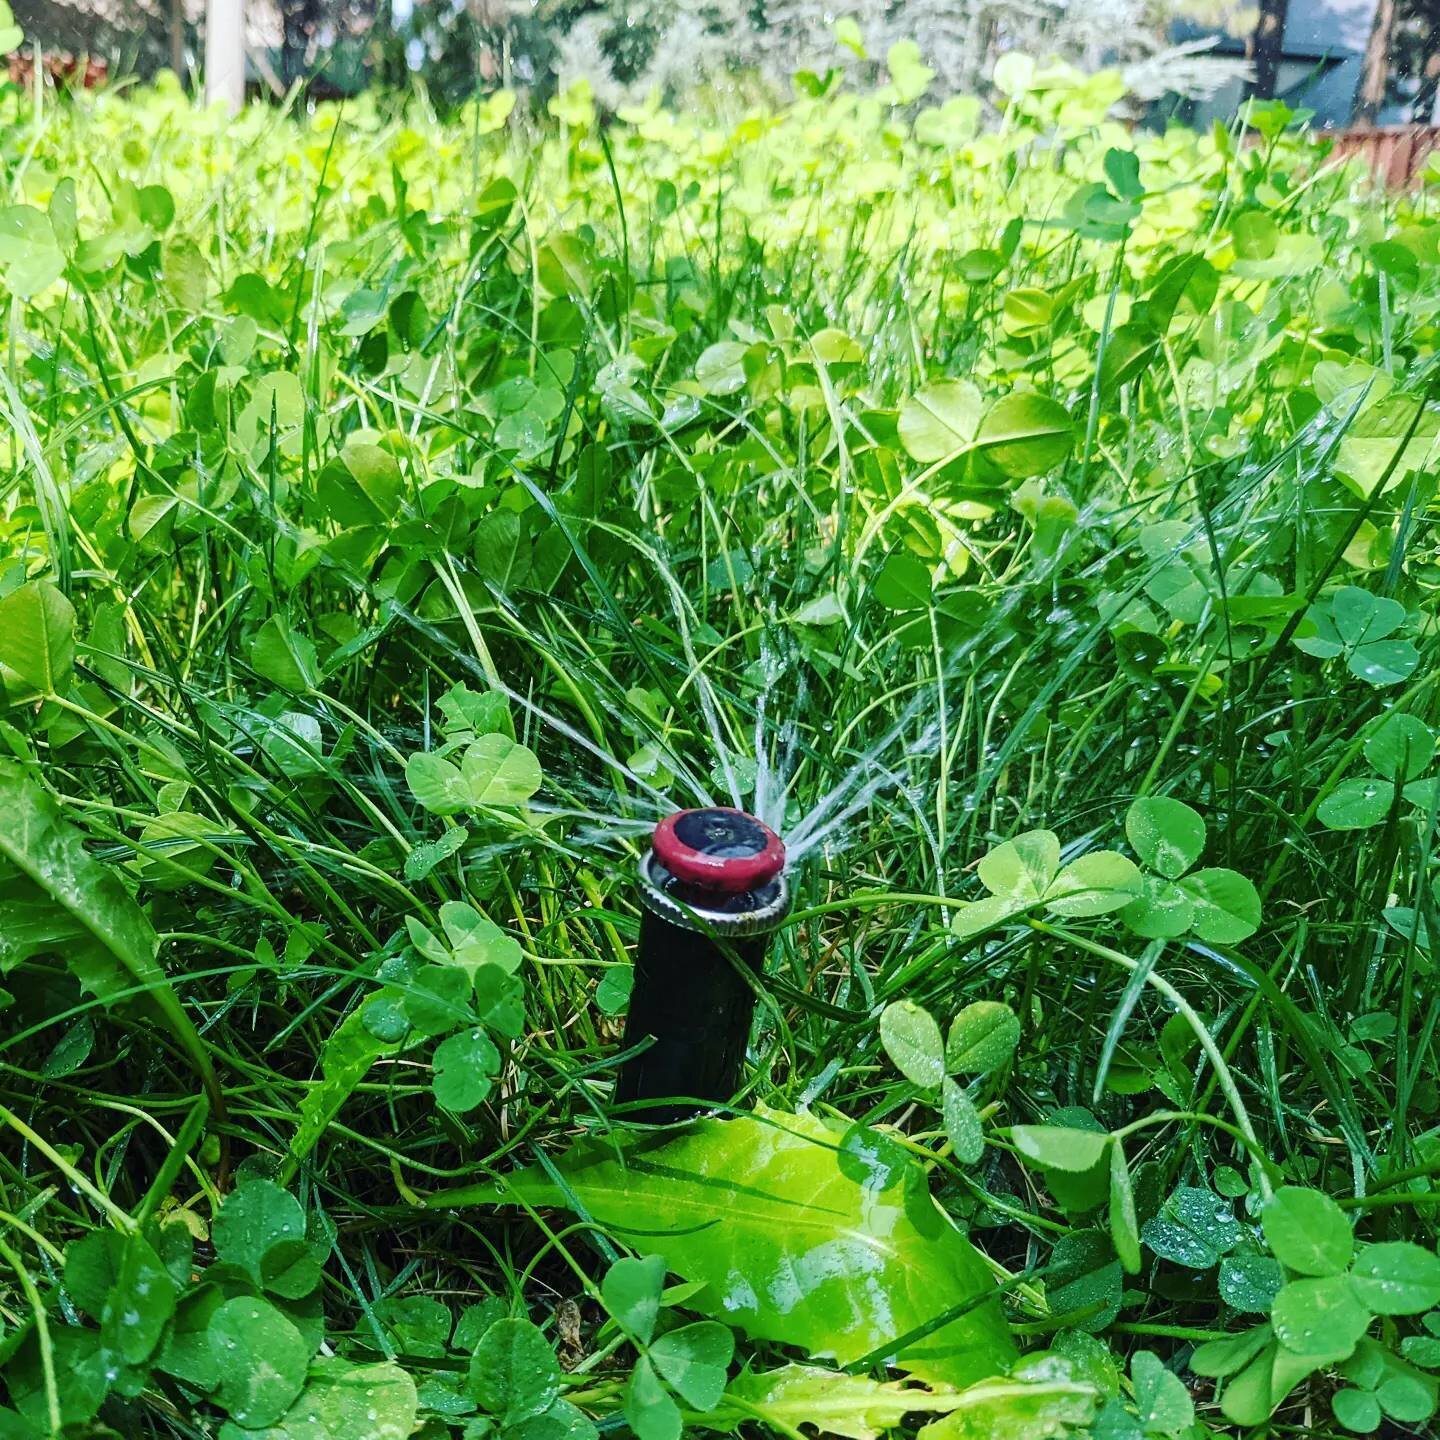 Nothing makes my heart happy quite like a rotary nozzle on an eco-lawn 💚 super proud of my client who seeded this lawn herself #waterwhysirrigation #waterwhys #ecolawn #mprotator #protimeseed